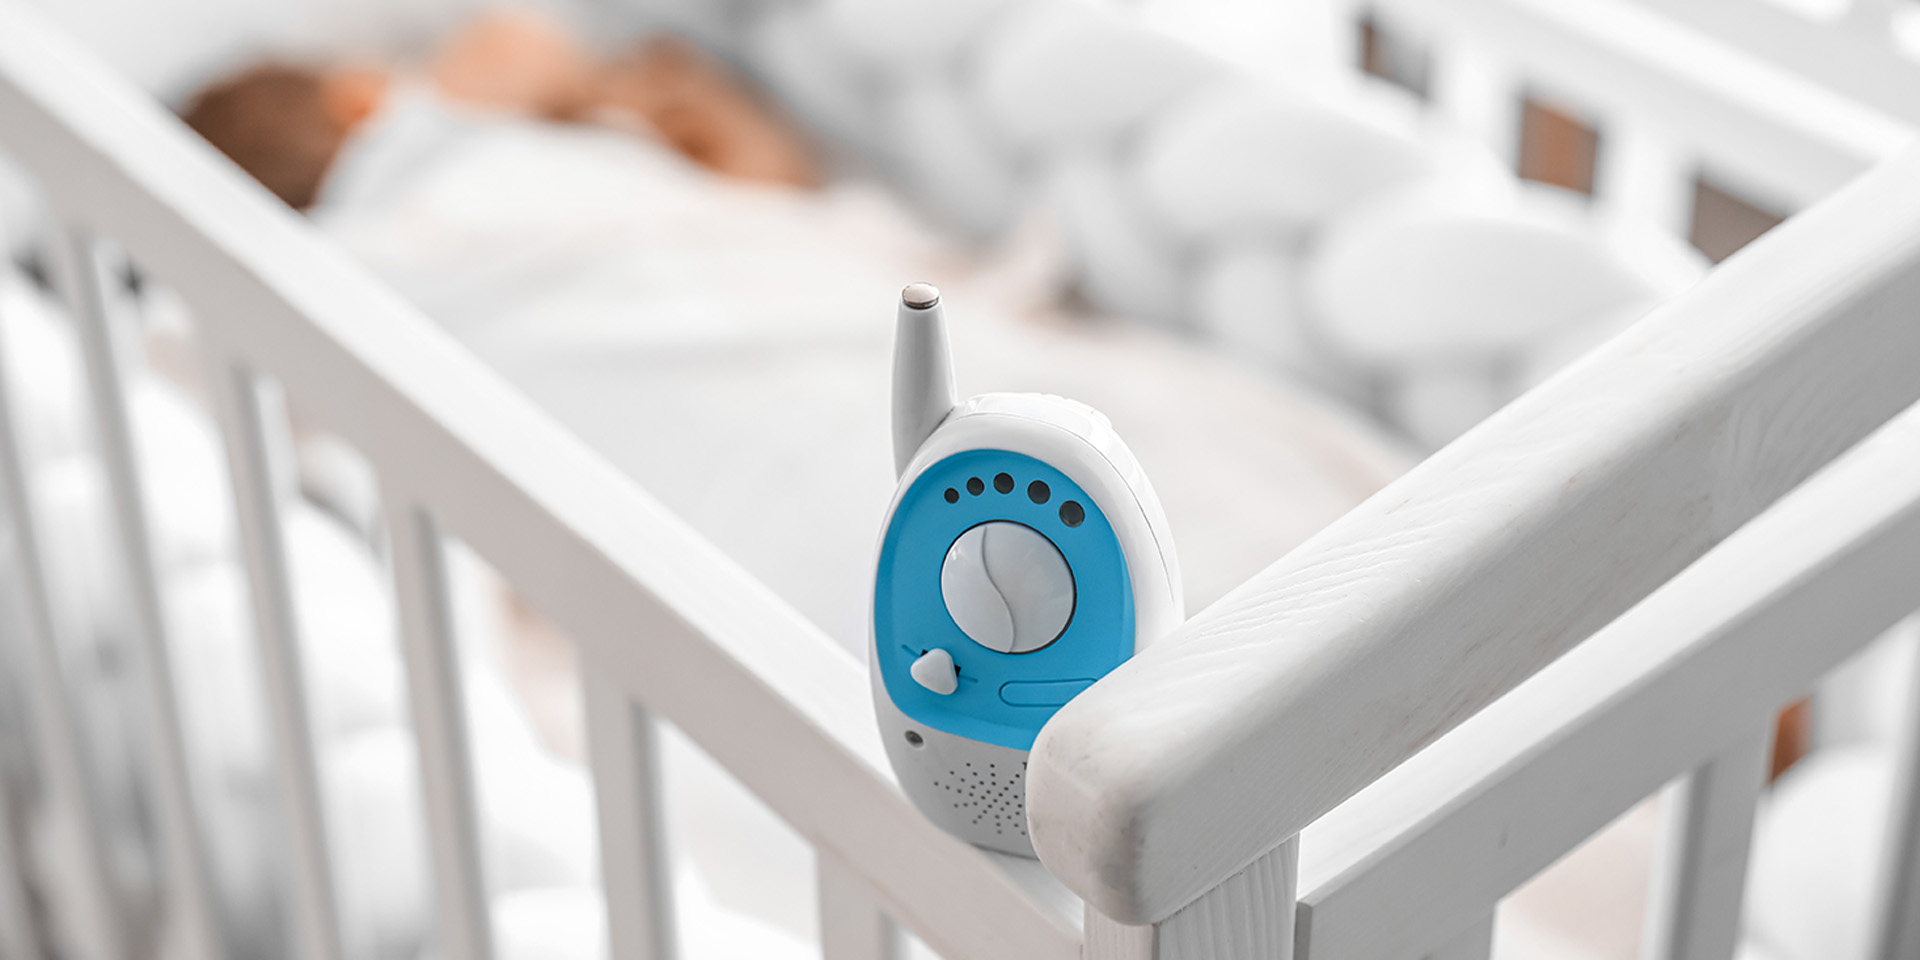 There is a baby monitor on a cot, a baby sleeping in the background